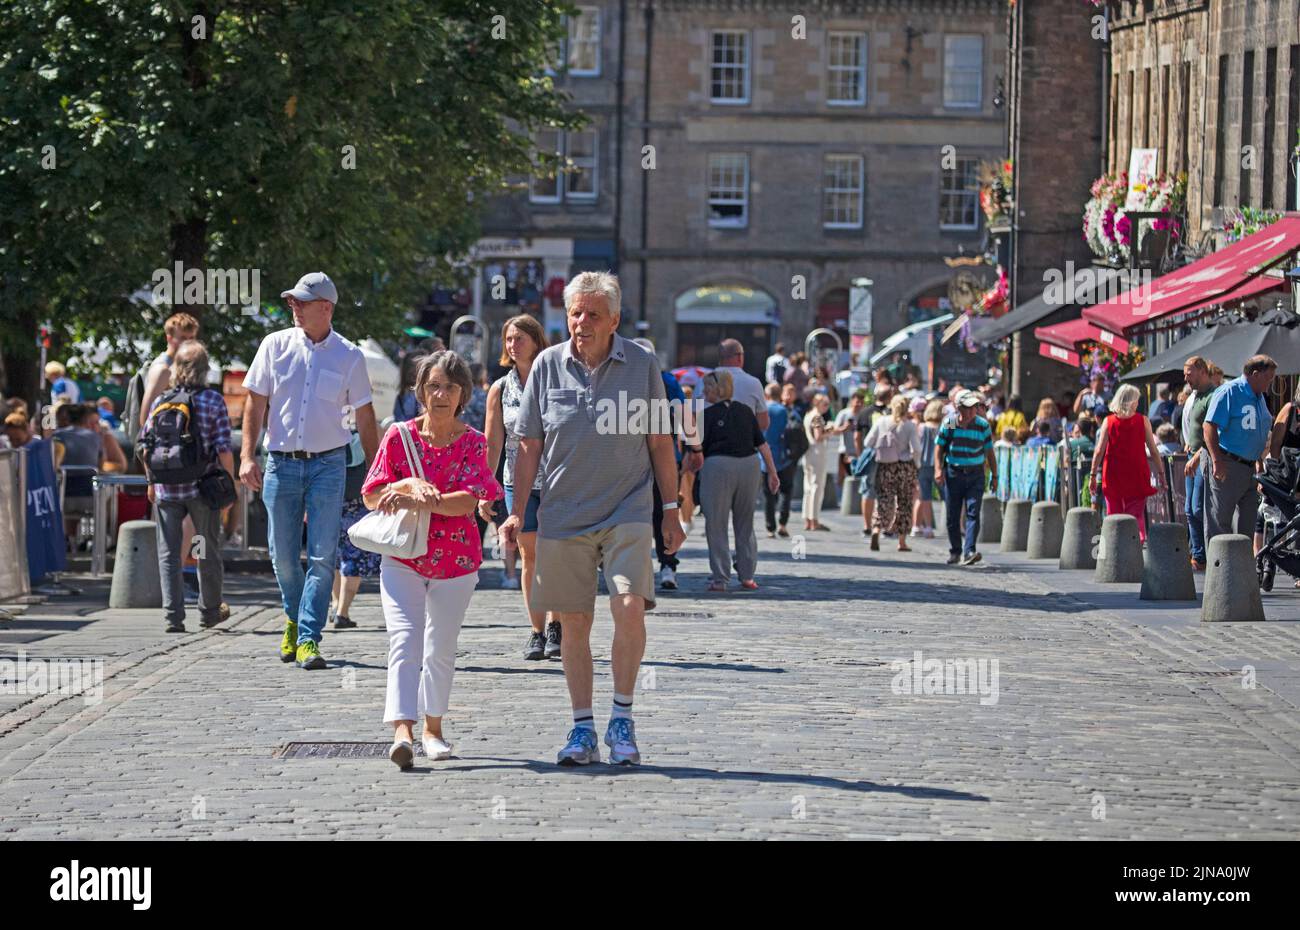 City centre, Edinburgh, Scotland, UK. 10th August 2022. Very hot in busy city High Street and Grassmarket. 26 fegrees centigrade in the afternoon. Credit: Arch White/alamy live news. Stock Photo